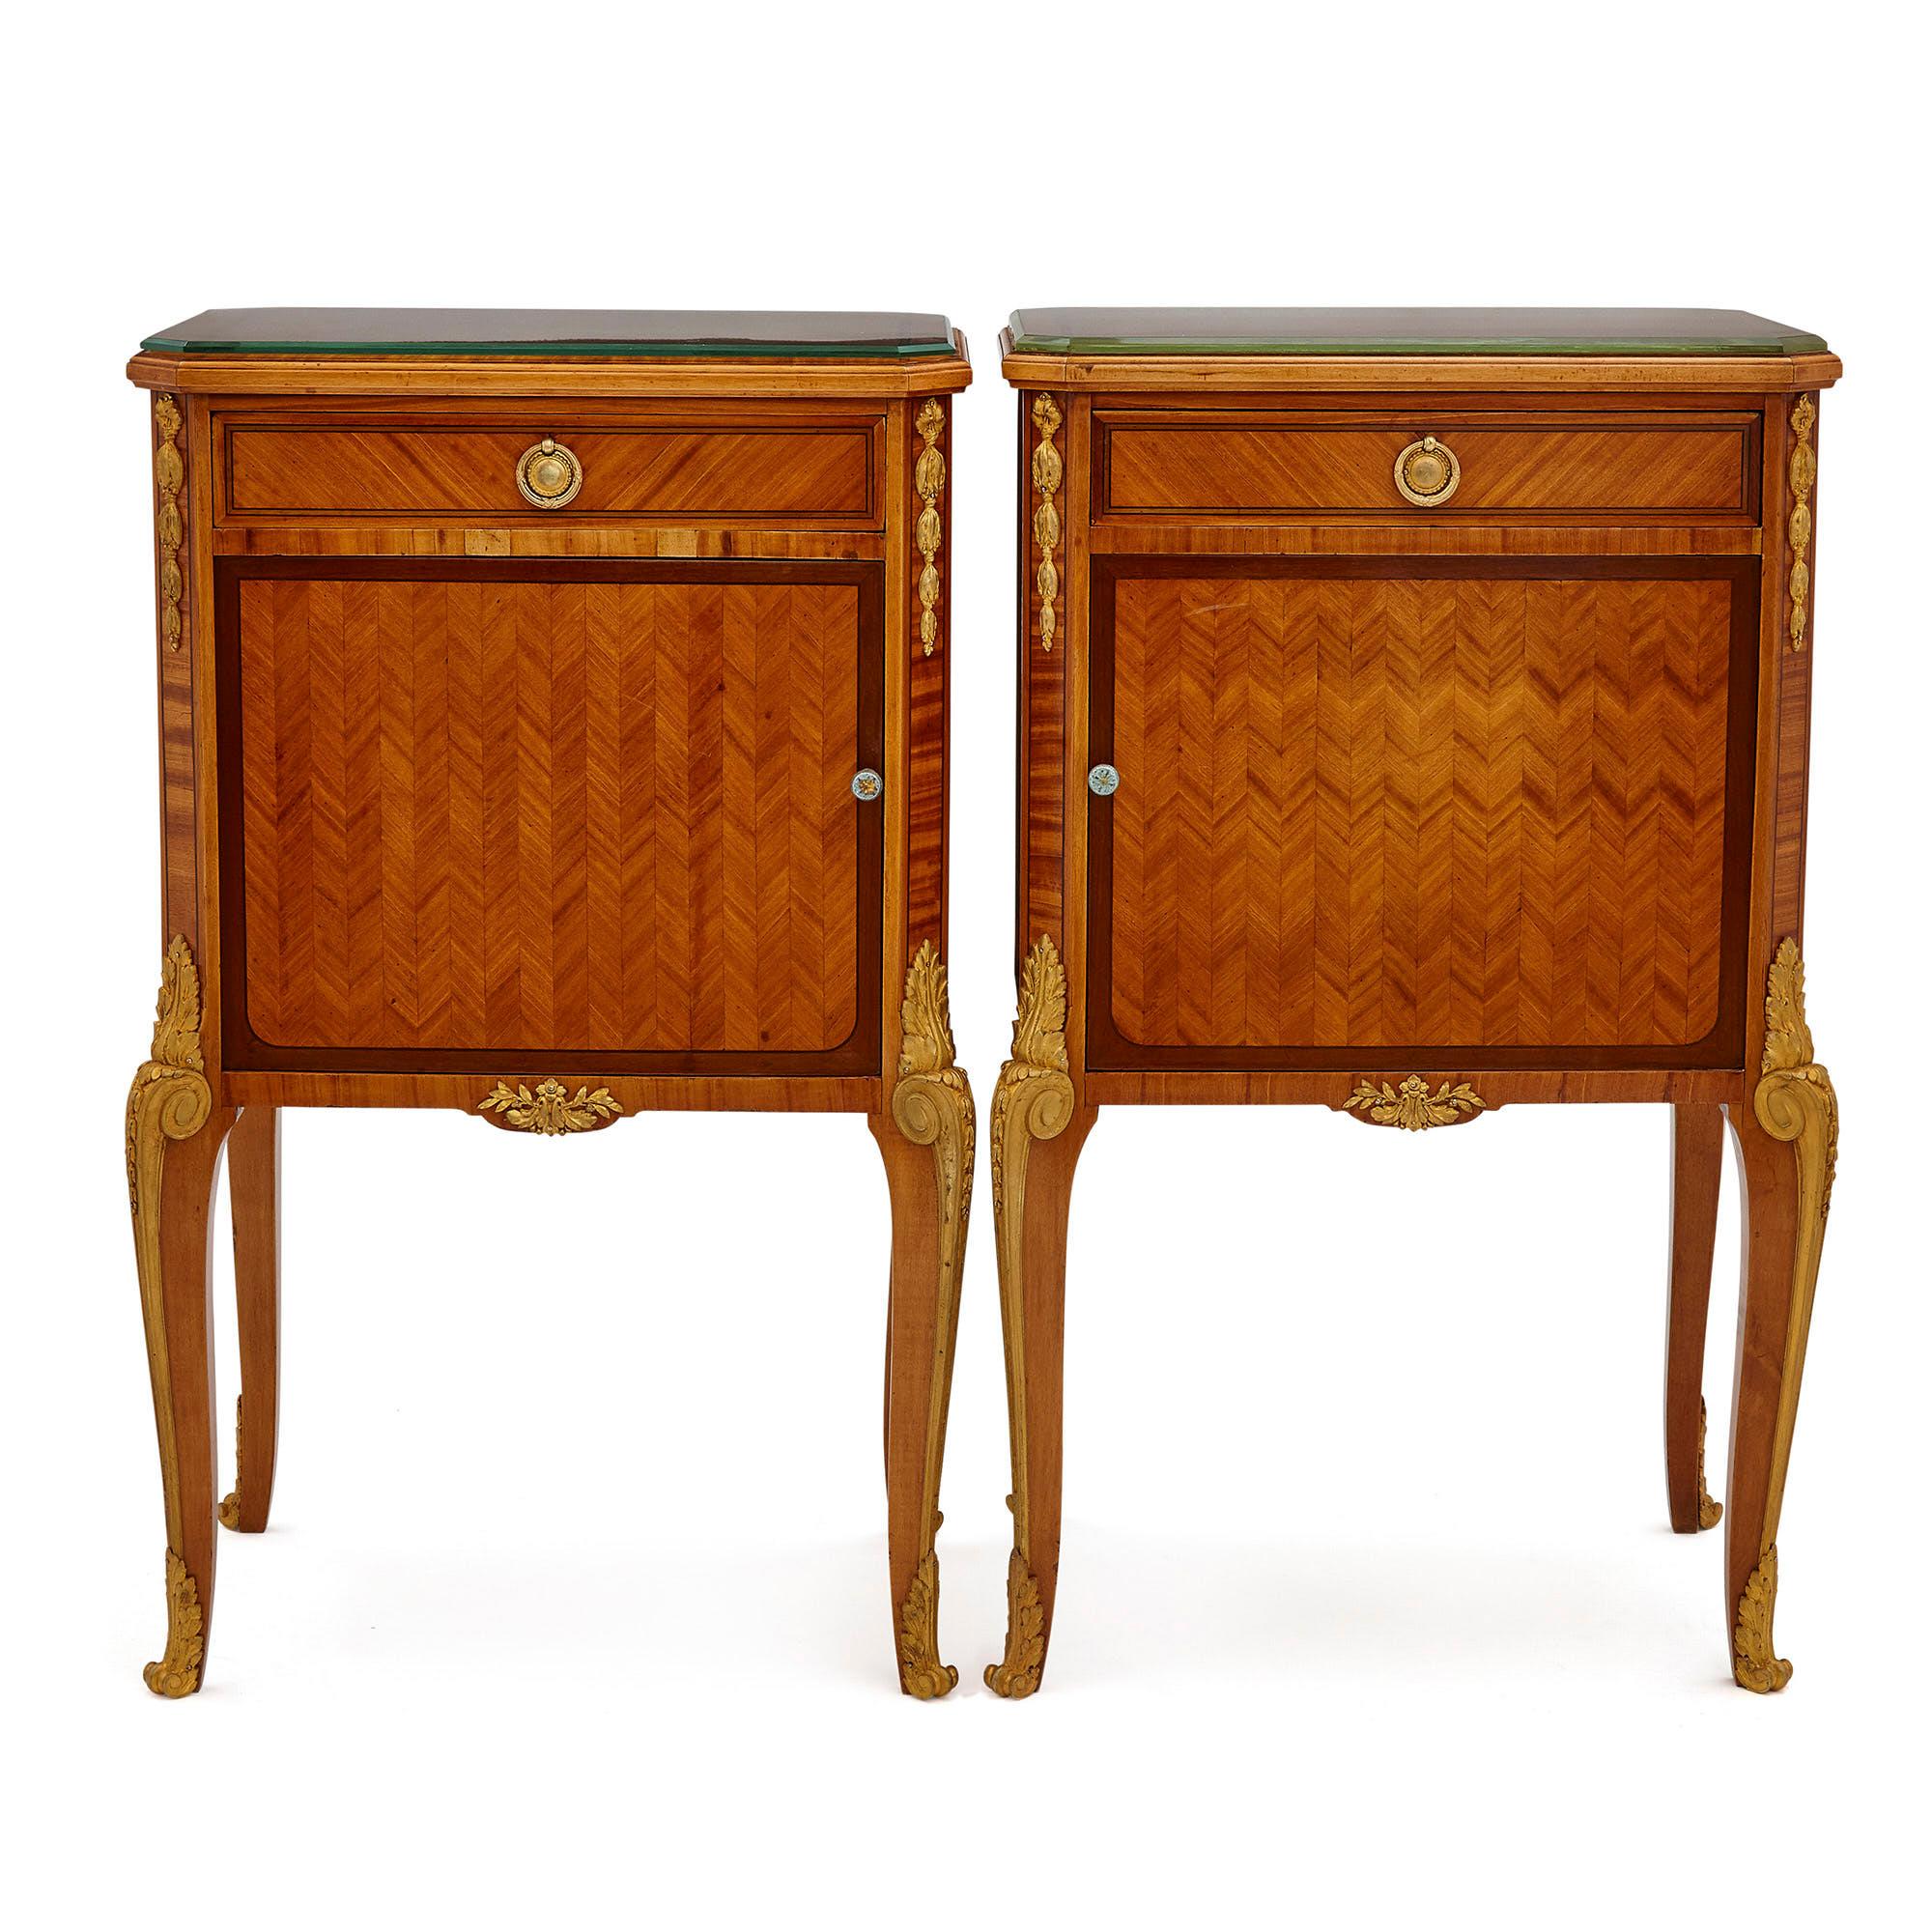 Pair of neoclassical style bedside cabinets retailed by Au Gros Chêne
French, late 19th century
Dimensions: Height 83cm, width 50cm, depth 35cm

Designed in the refined Neoclassical style, this pair of bedside cabinets are crafted from hardwood